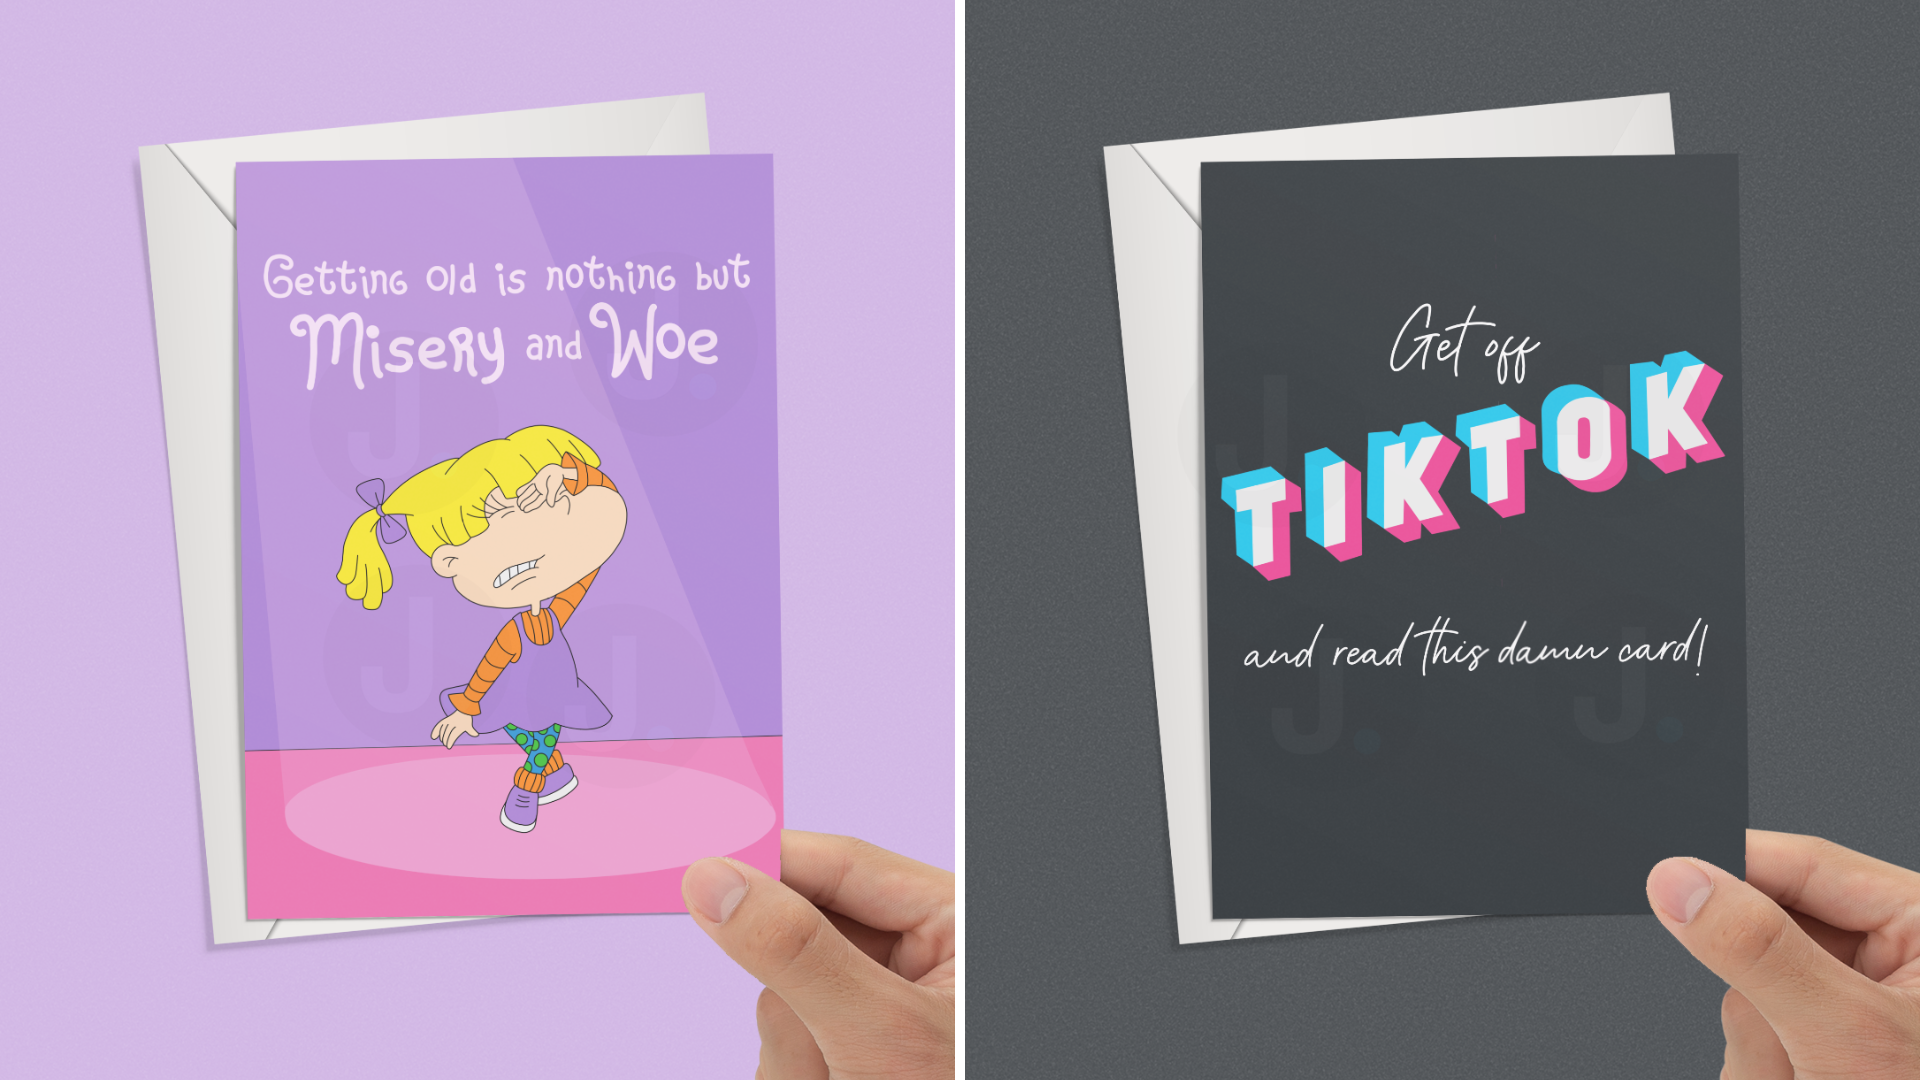 Amusing Greetings Cards Your Friends Will Love - Amusing Greetings Cards